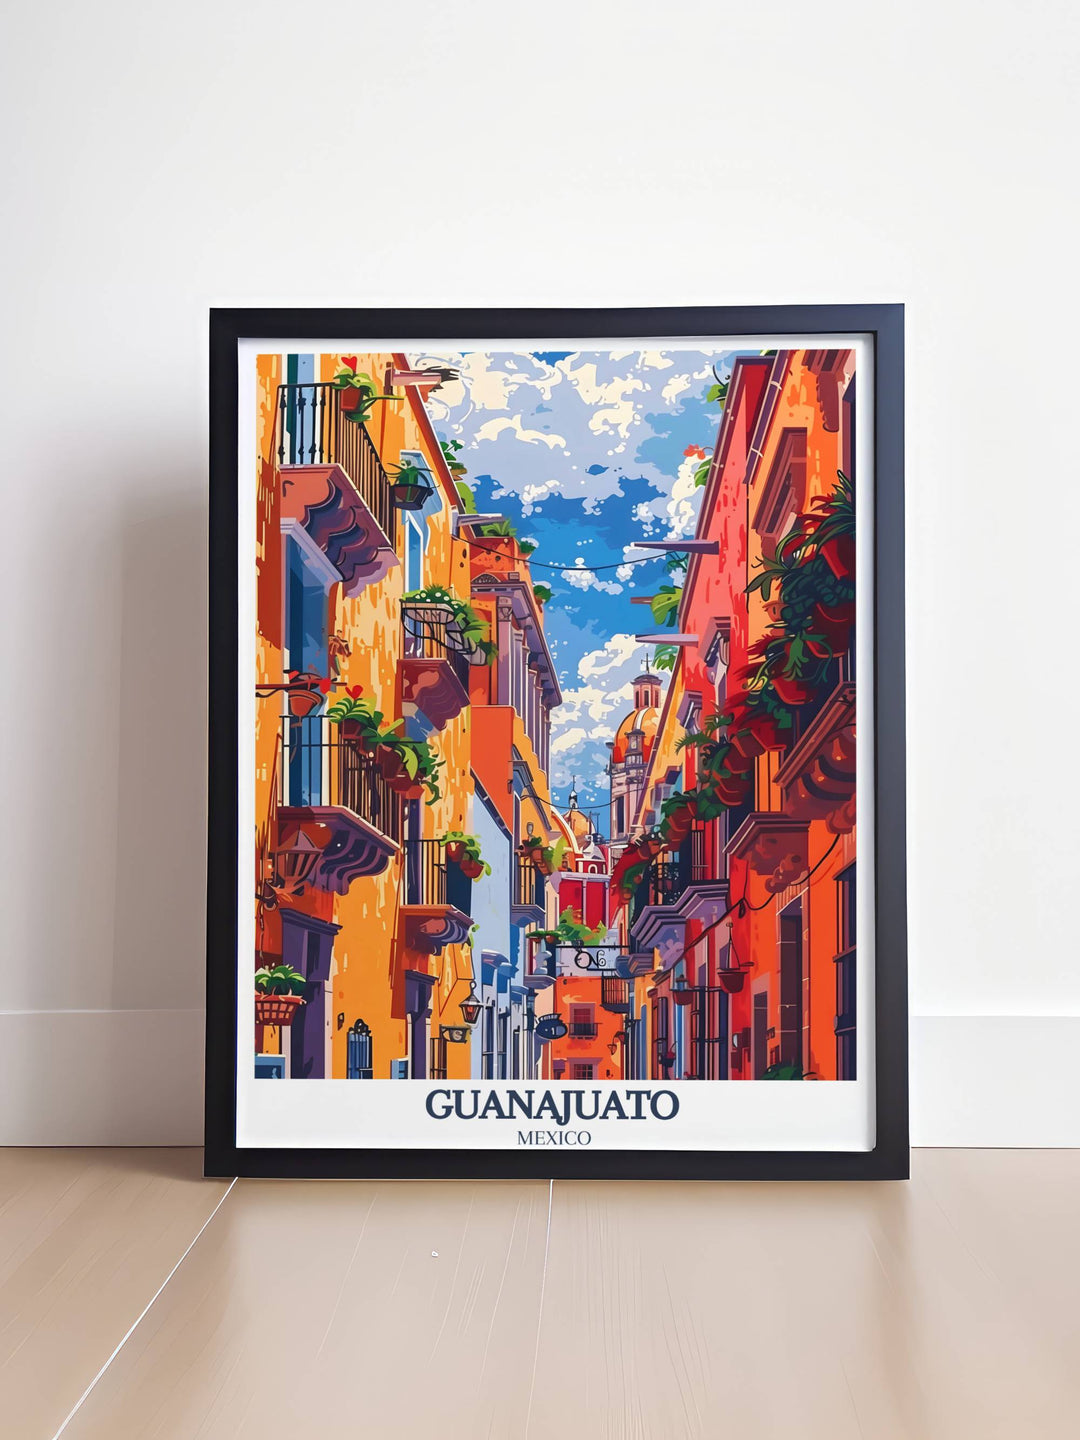 Detailed artwork of Callejón del Beso, capturing the romantic legend and narrow alleyways that define Guanajuatos charm and allure.